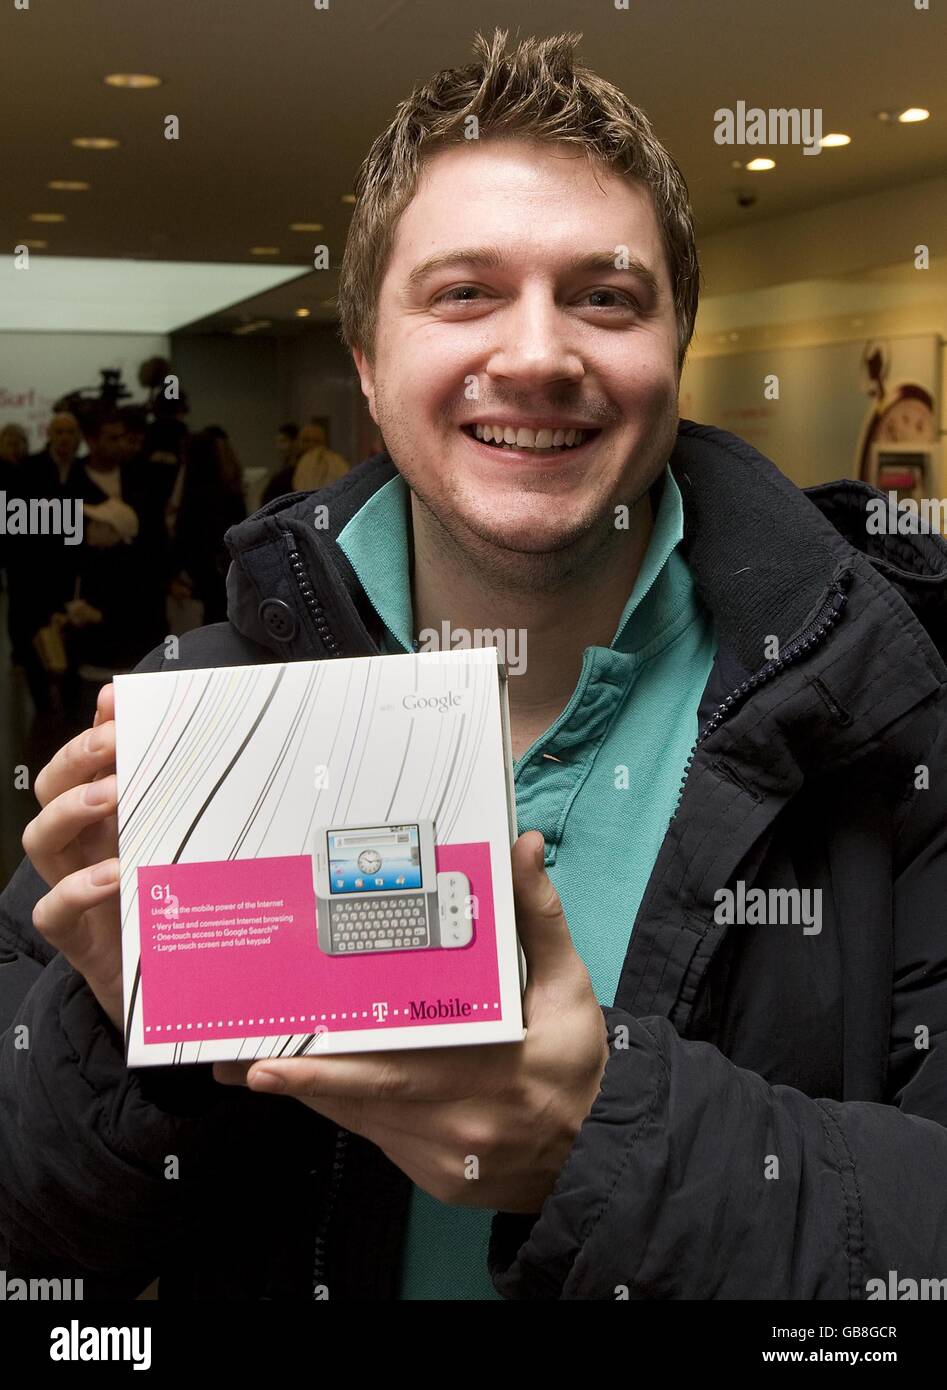 Andy Burgess, a software developer from London becomes the first person in the UK to buy a T-Mobile G1 mobile phone after it went on sale for the first time in the UK today, at the T-Mobile store in Oxford Street, London. Stock Photo